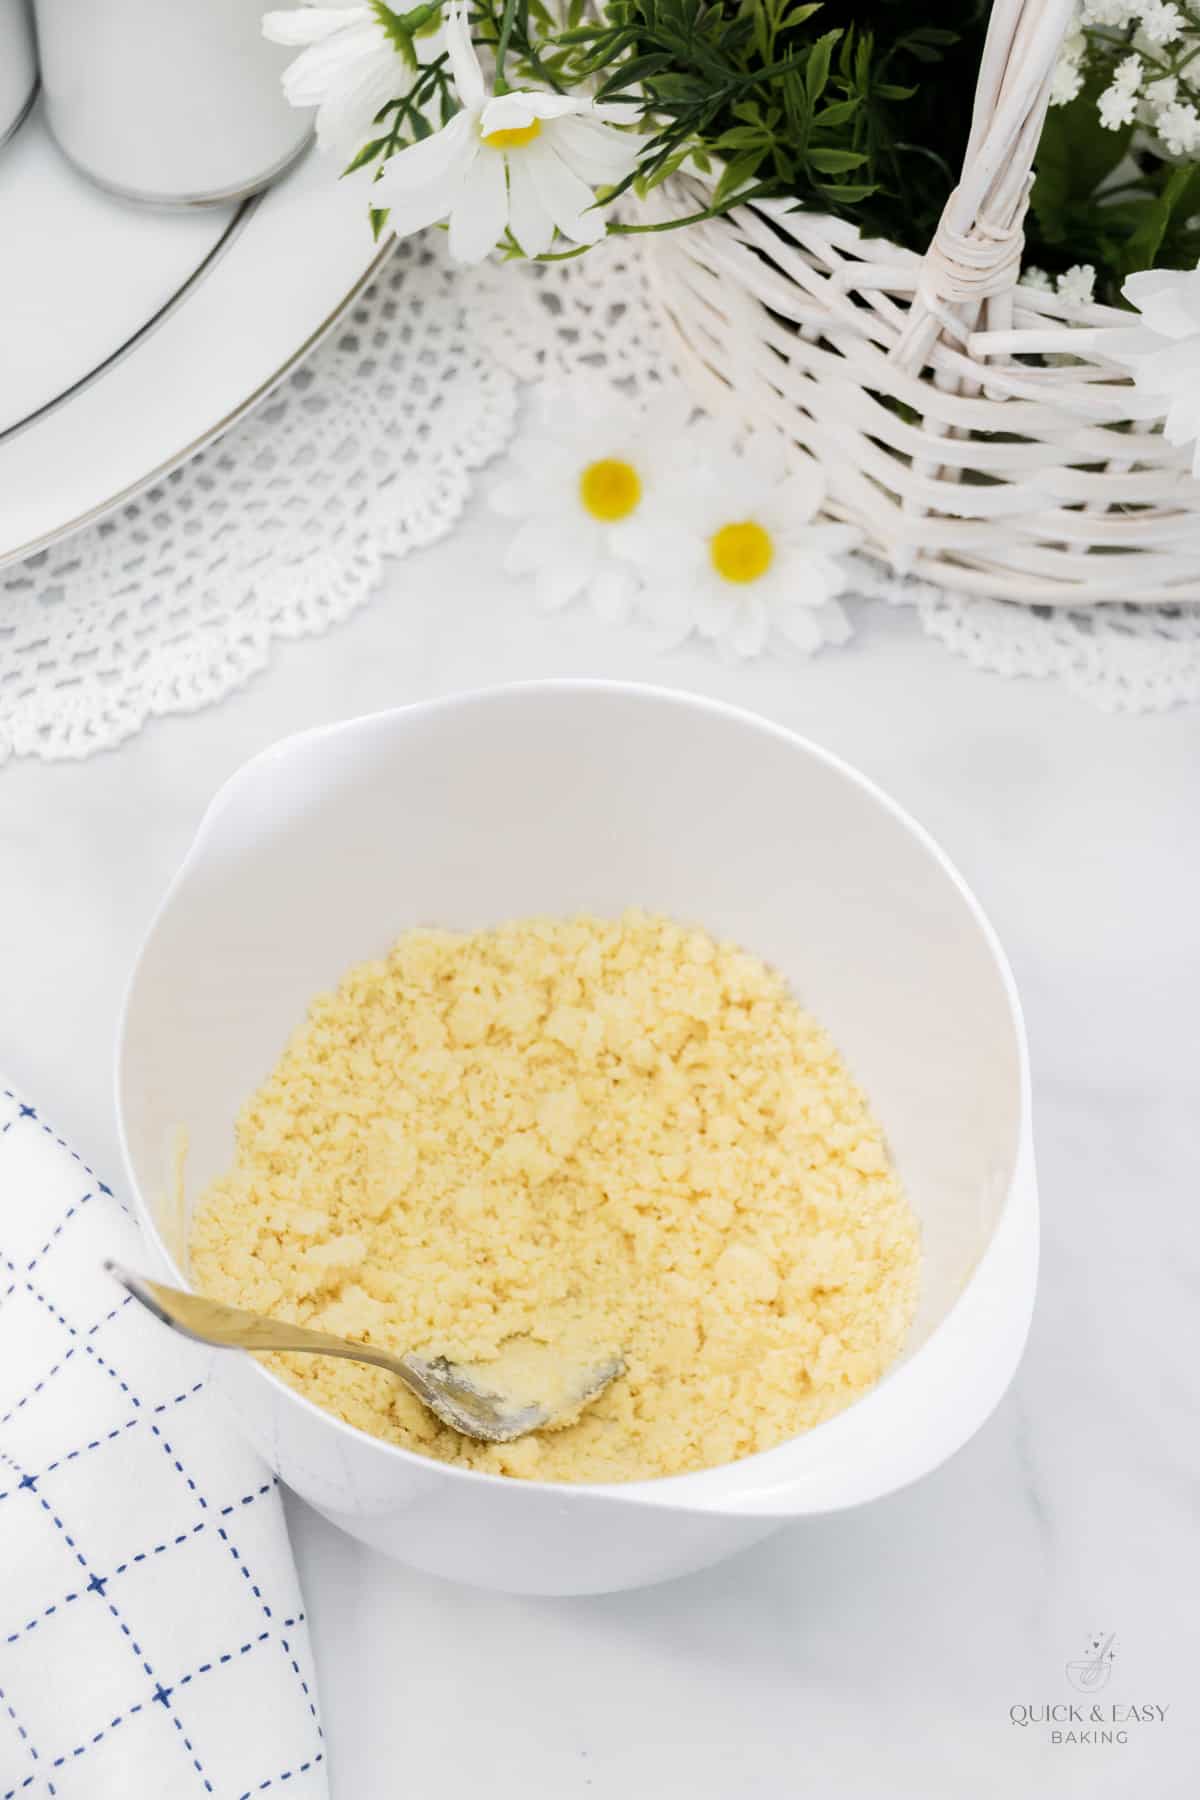 Lemon pudding crunch mixture in a white mixing bowl.